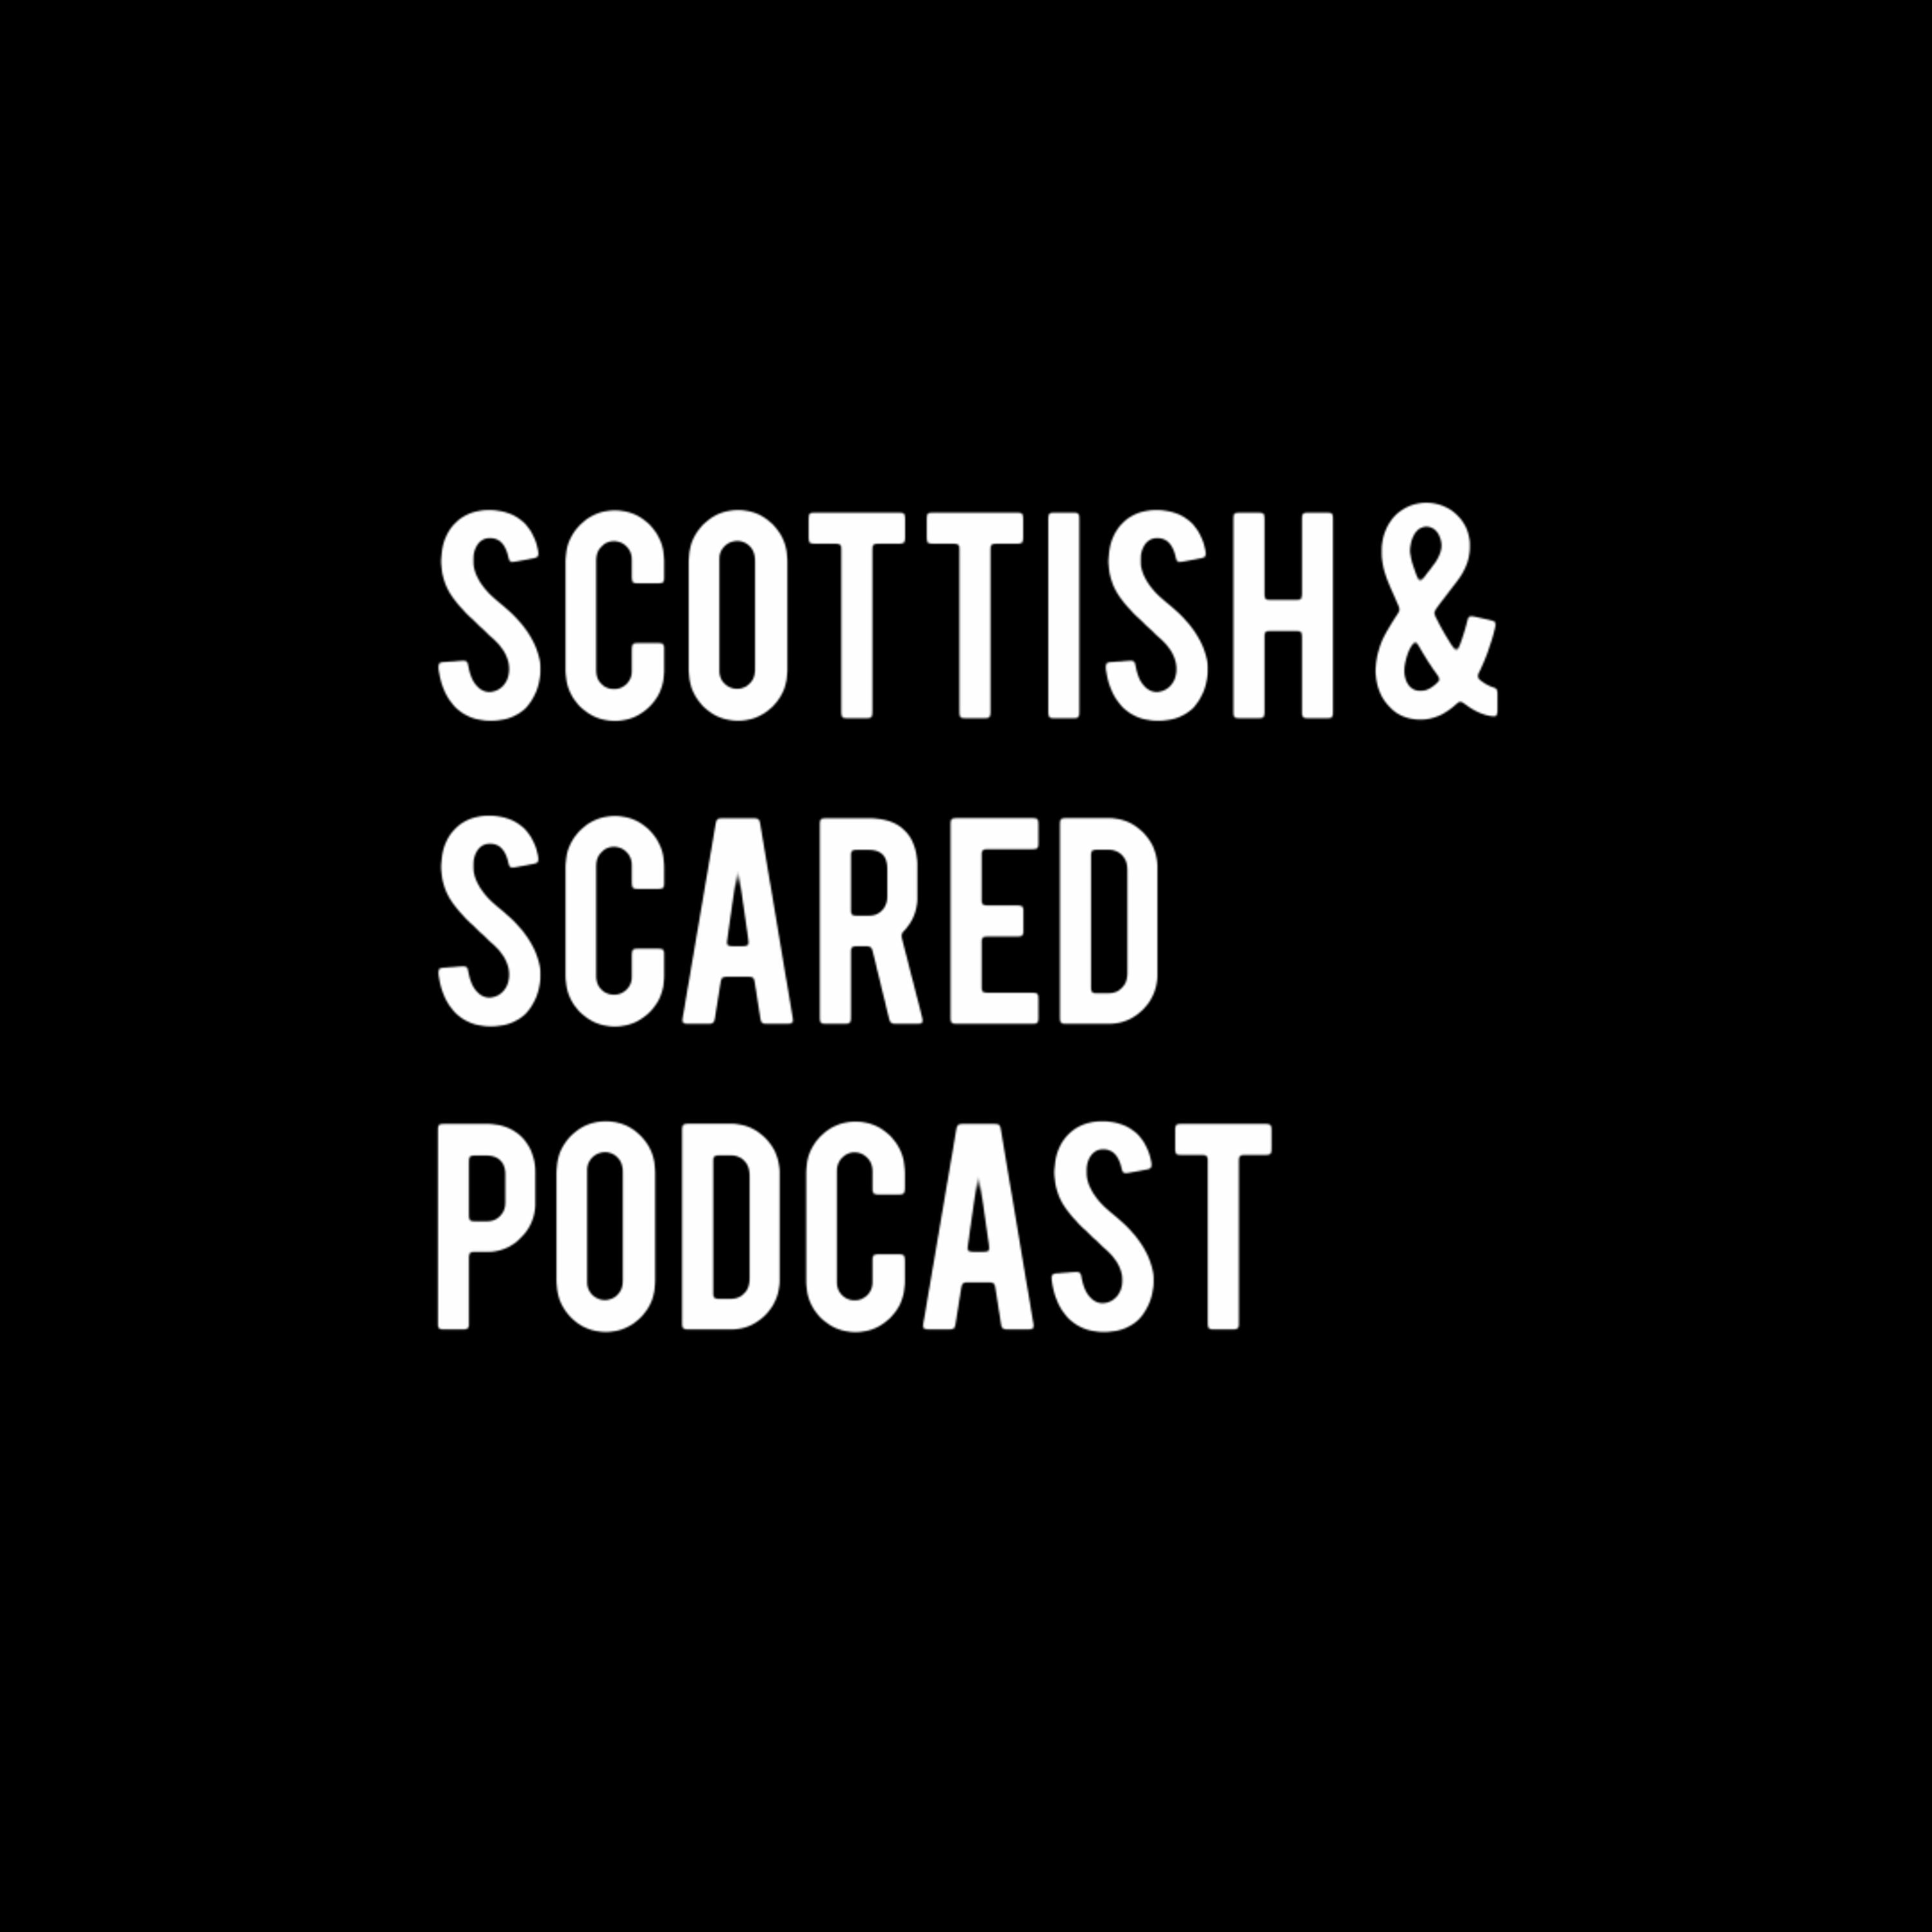 Scottish Collaboration Episode 8: The Culture Swally & 2 Pints of Bru